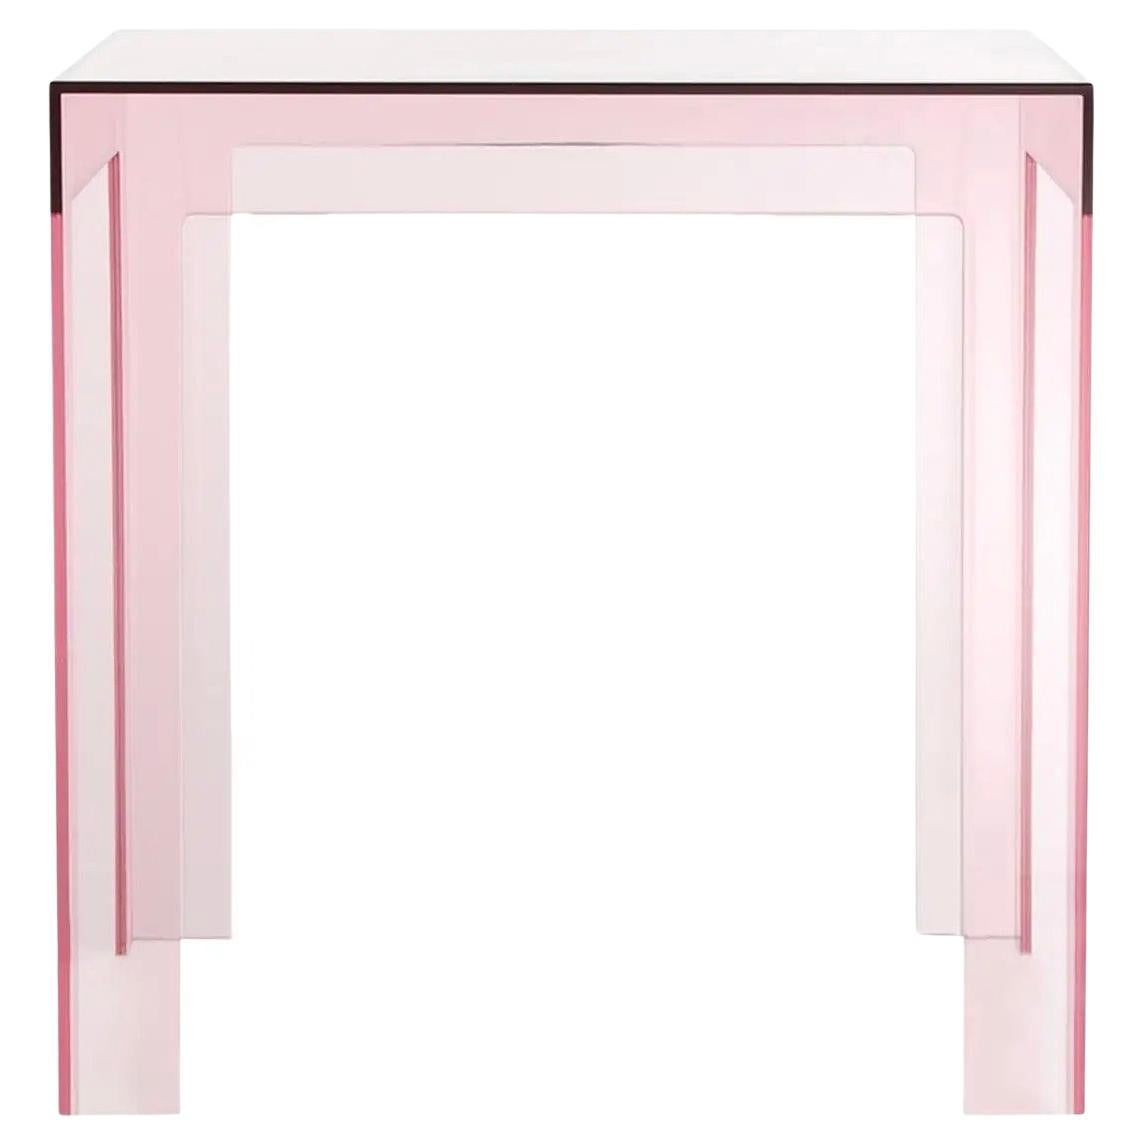 Kartell Jolly Side Table in Pink by Paolo Rizzatto